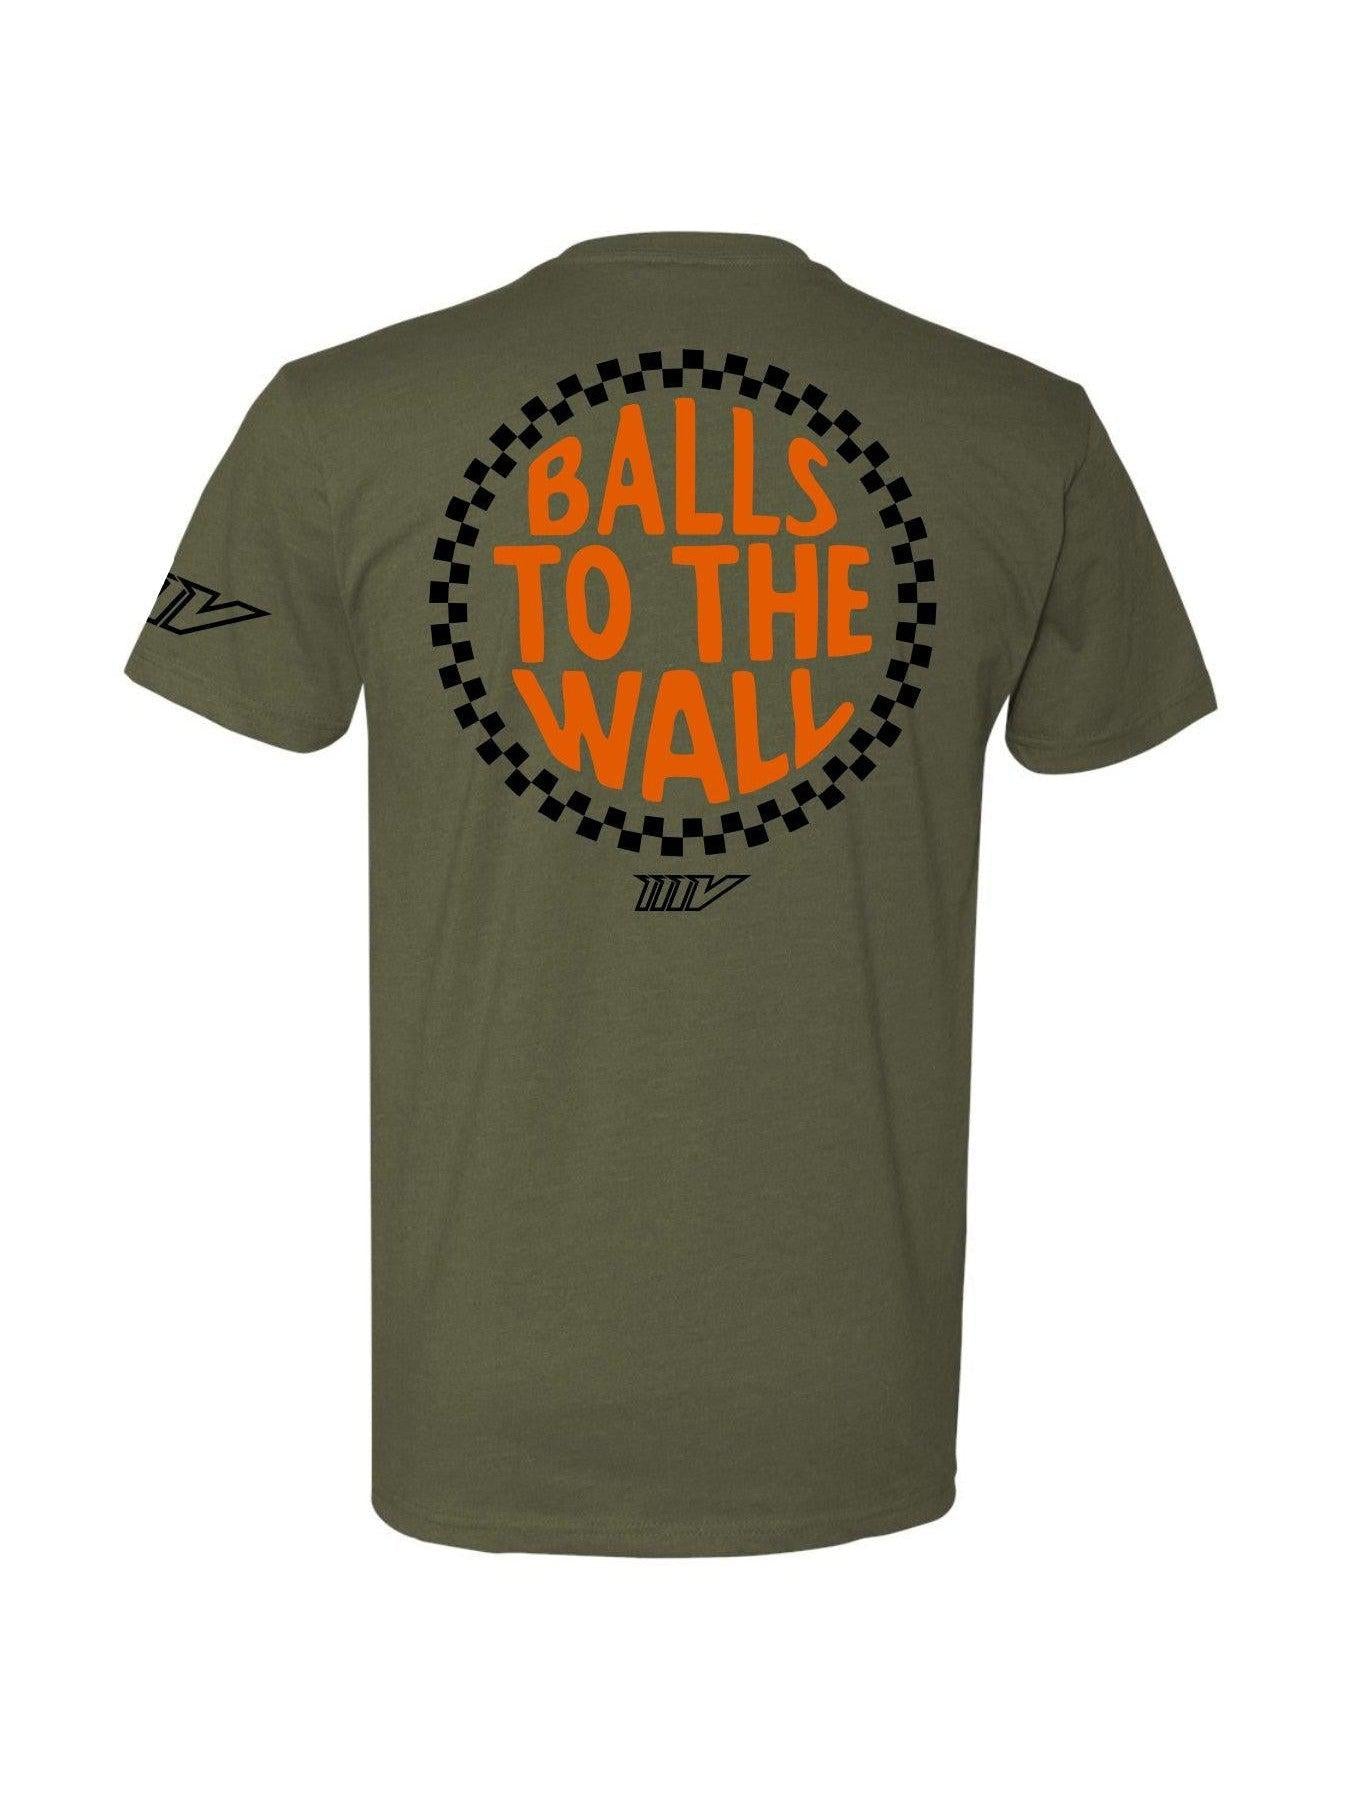 Balls to the Wall 2.0 Military Tee